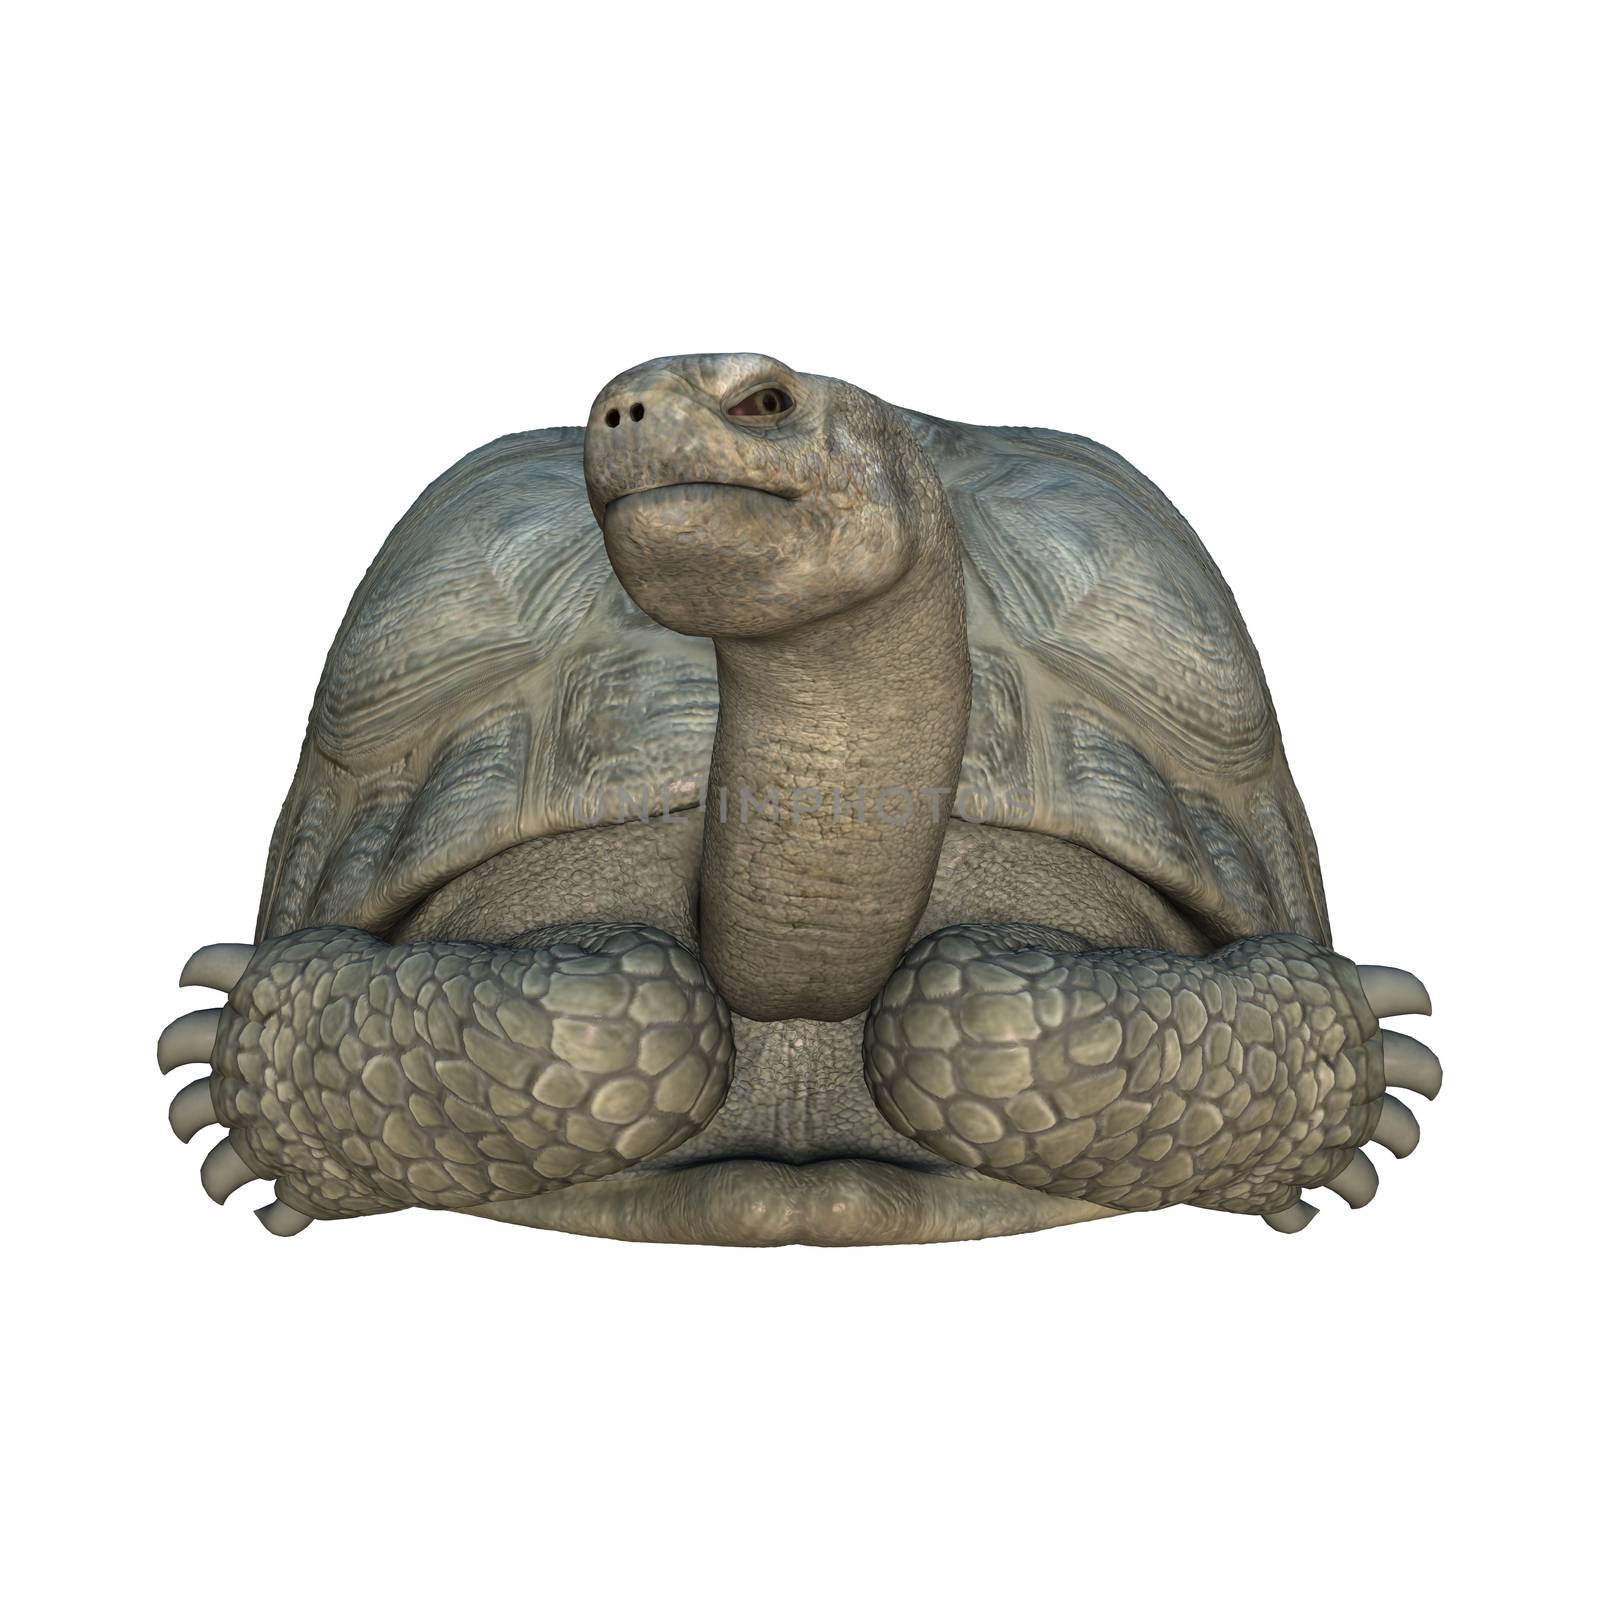 3D digital render of a Galapagos tortoise iaolated on white background,